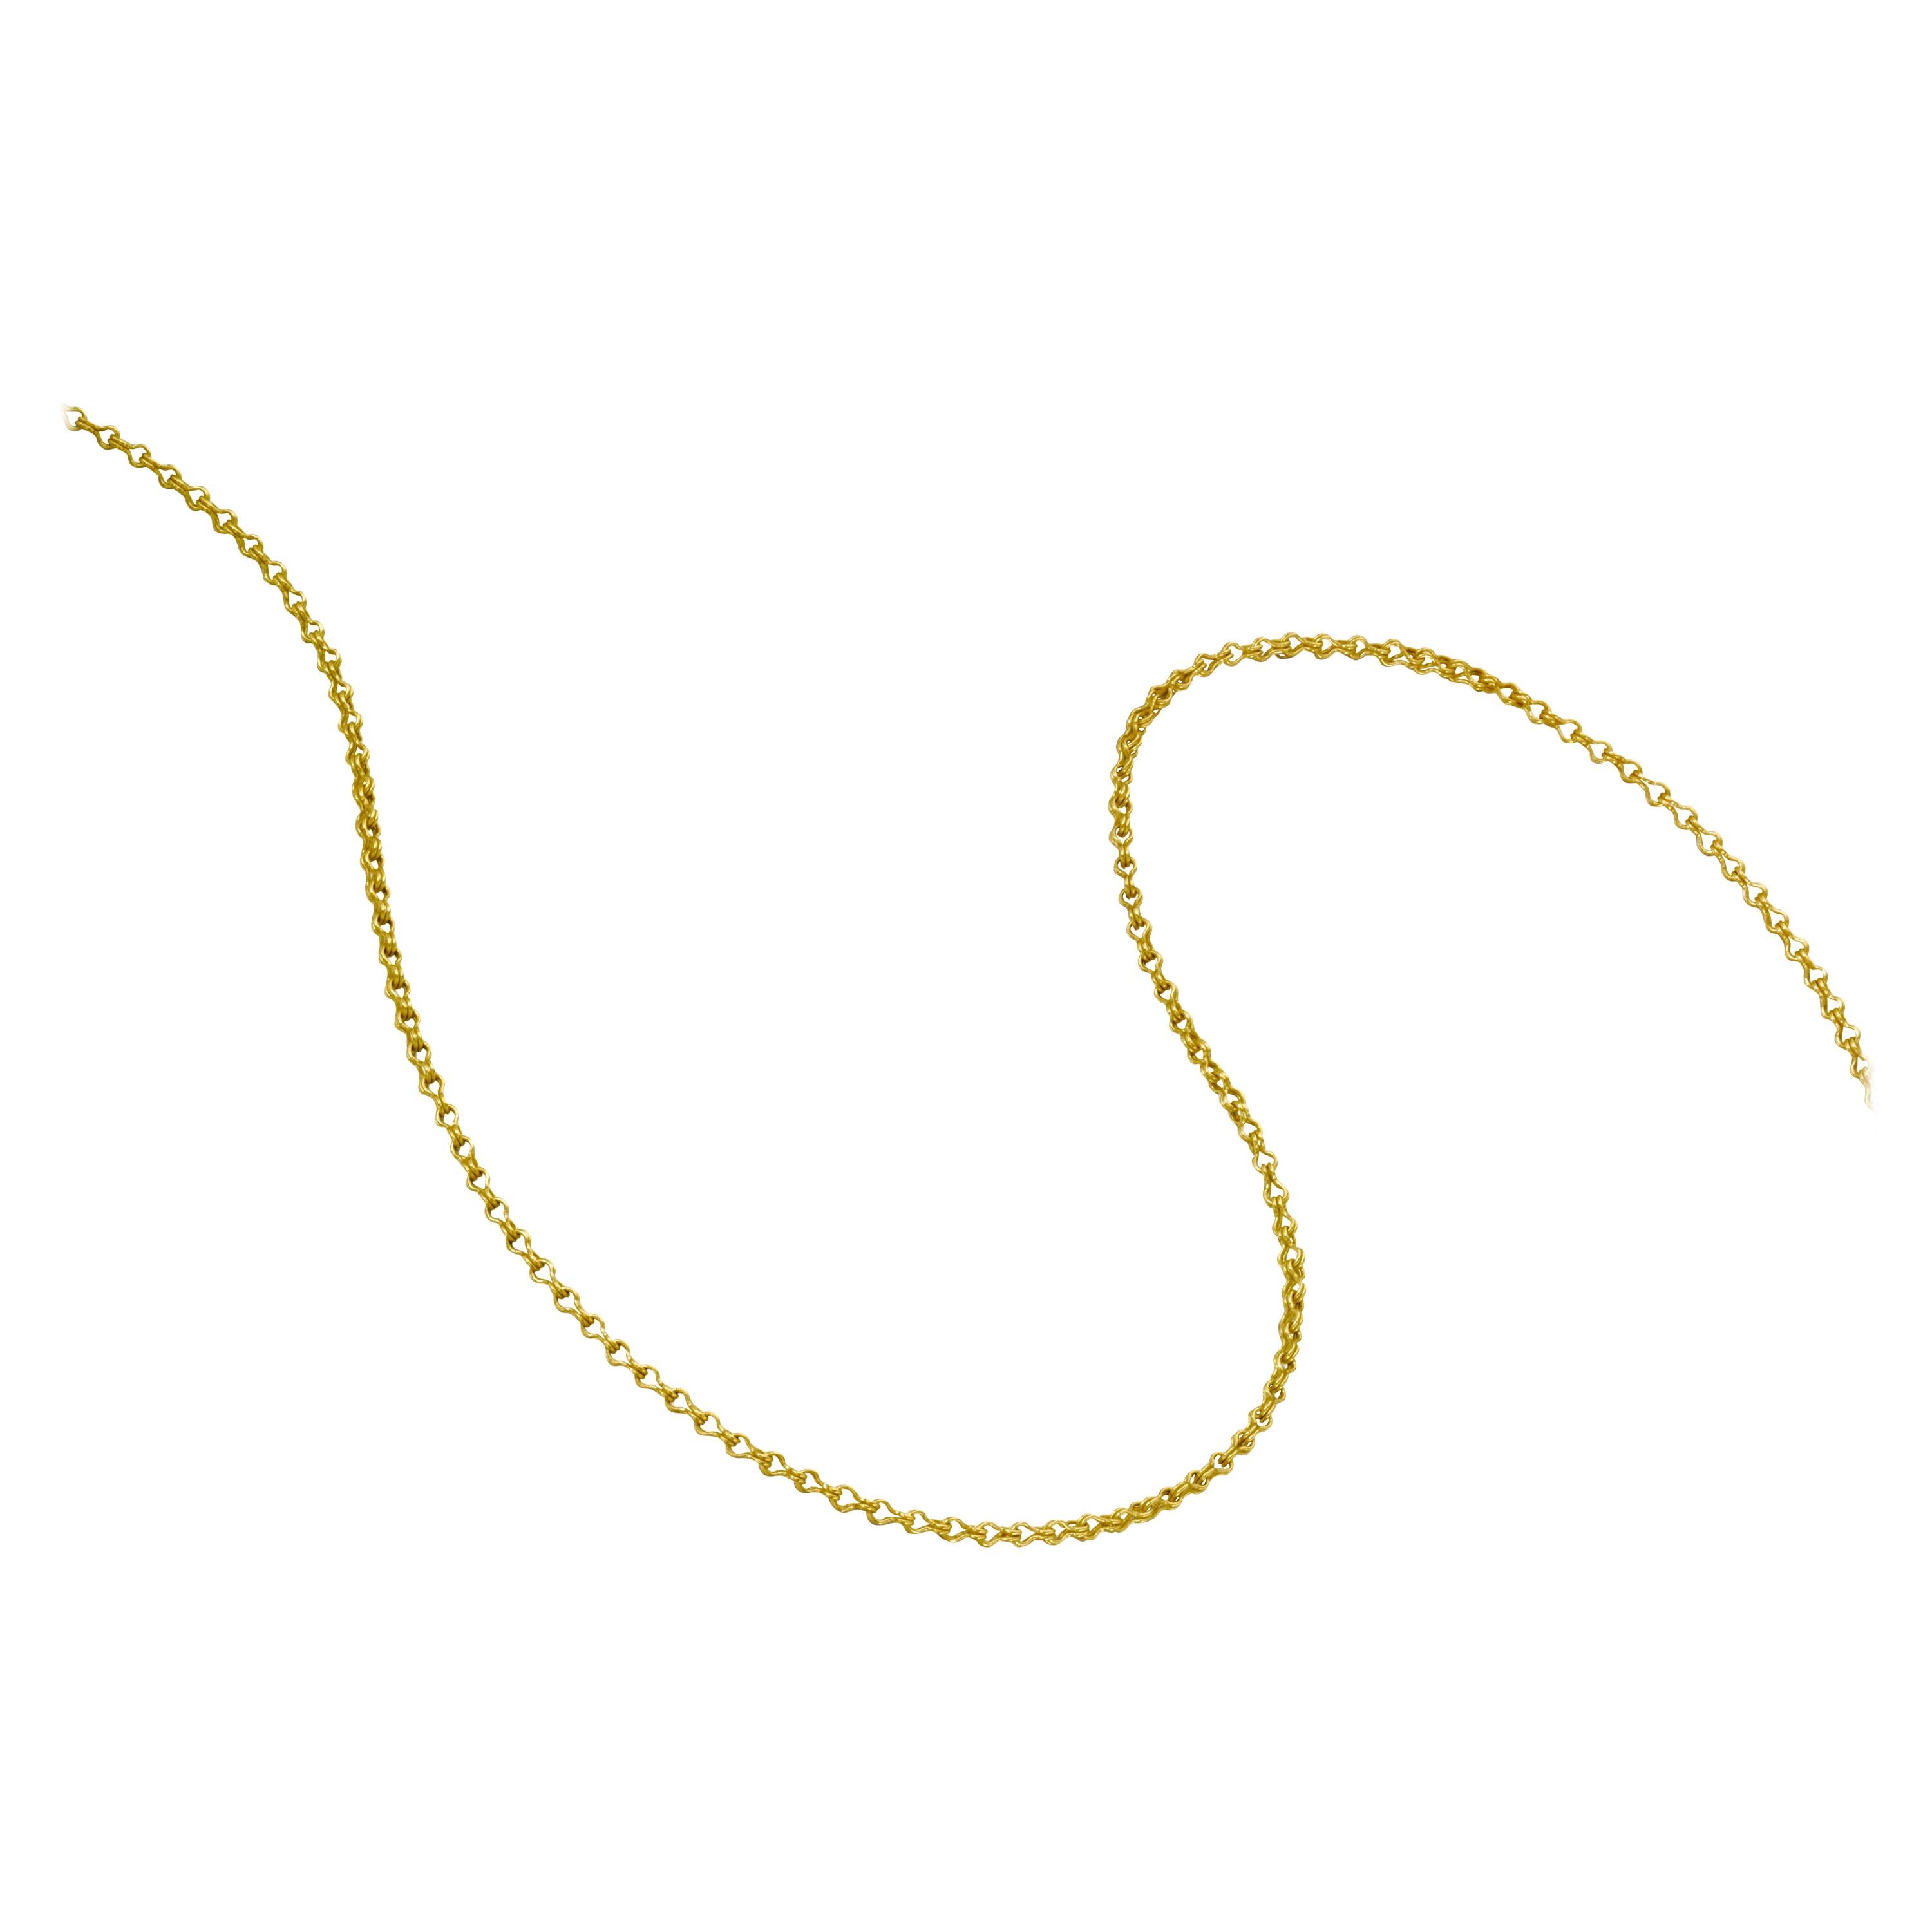 22 Karat Yellow Gold Chain Necklace For Sale